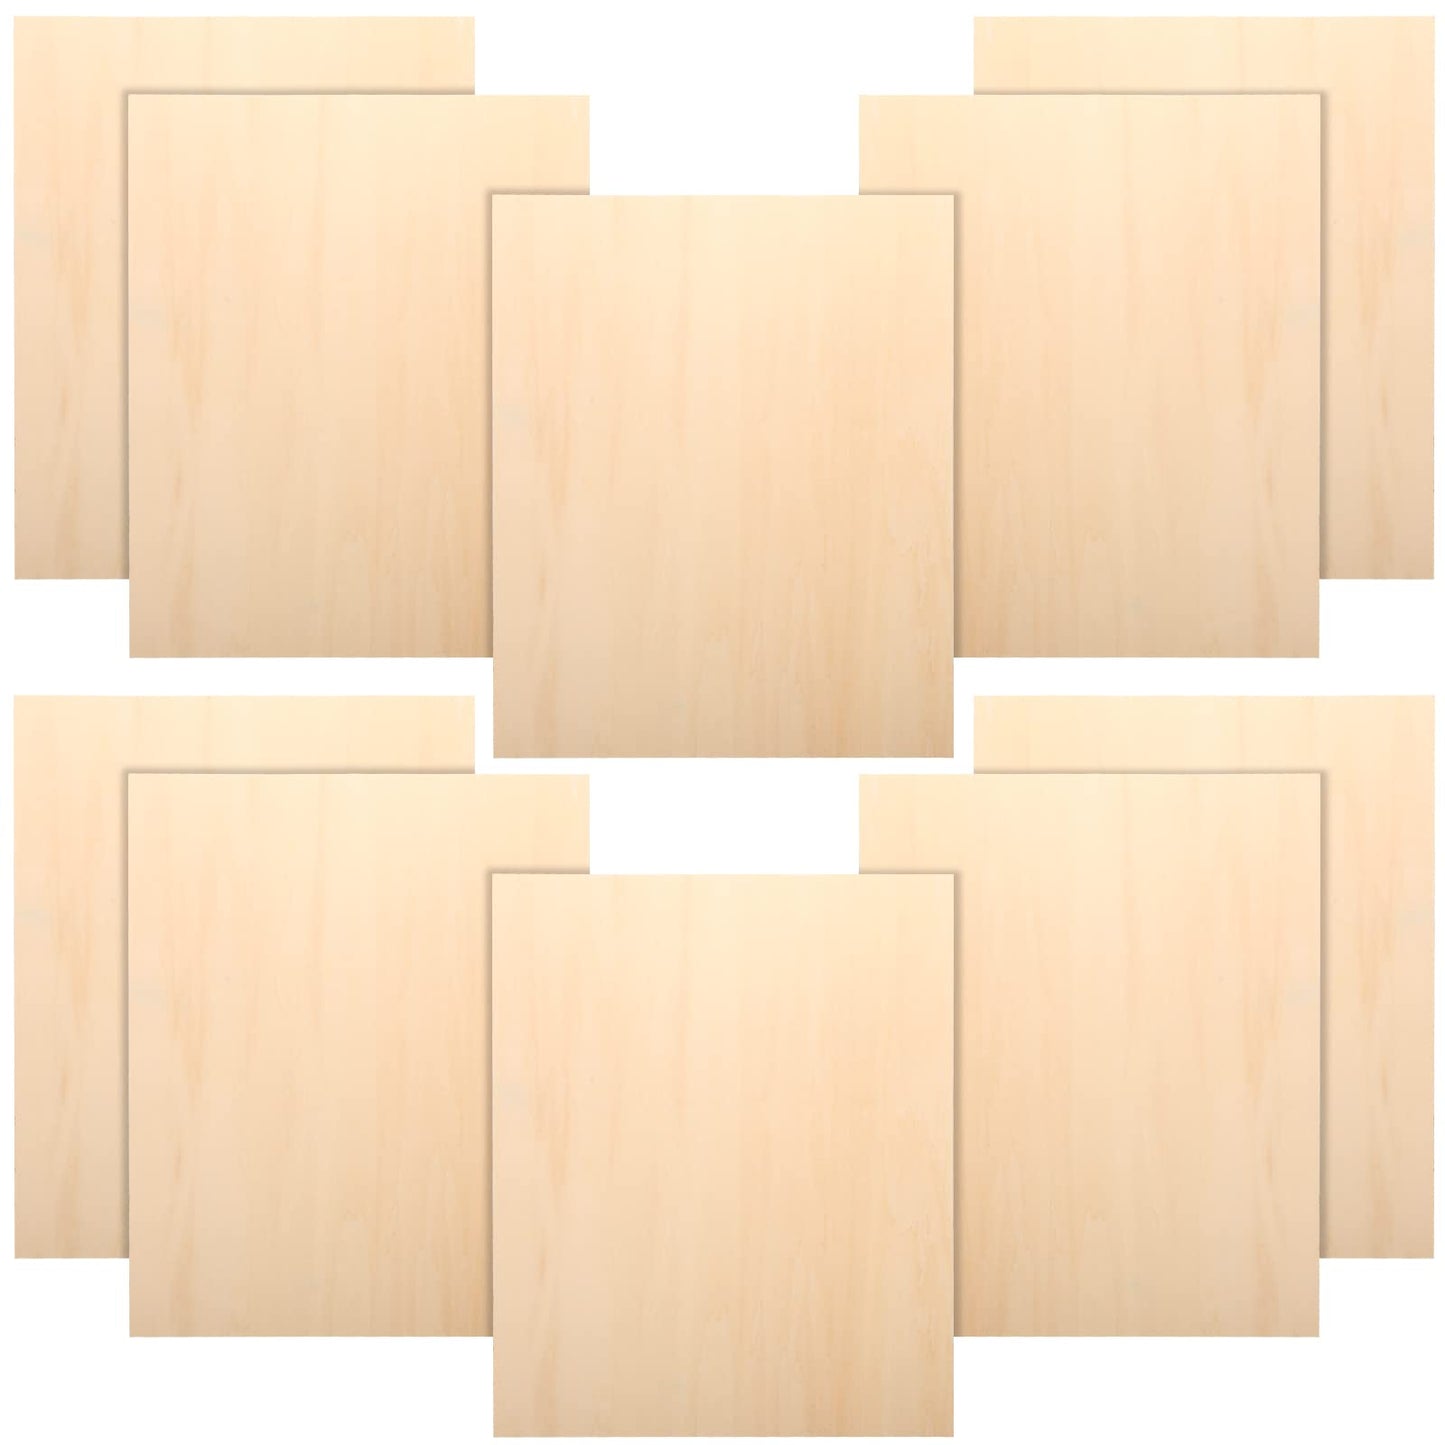 1/16 x 10 x 12 Inch Basswood Sheets Unfinished Wood Sheets Basswood Blank Sheet Thin DIY Wood Pieces for Arts and Crafts DIY Cutting Wood Burning